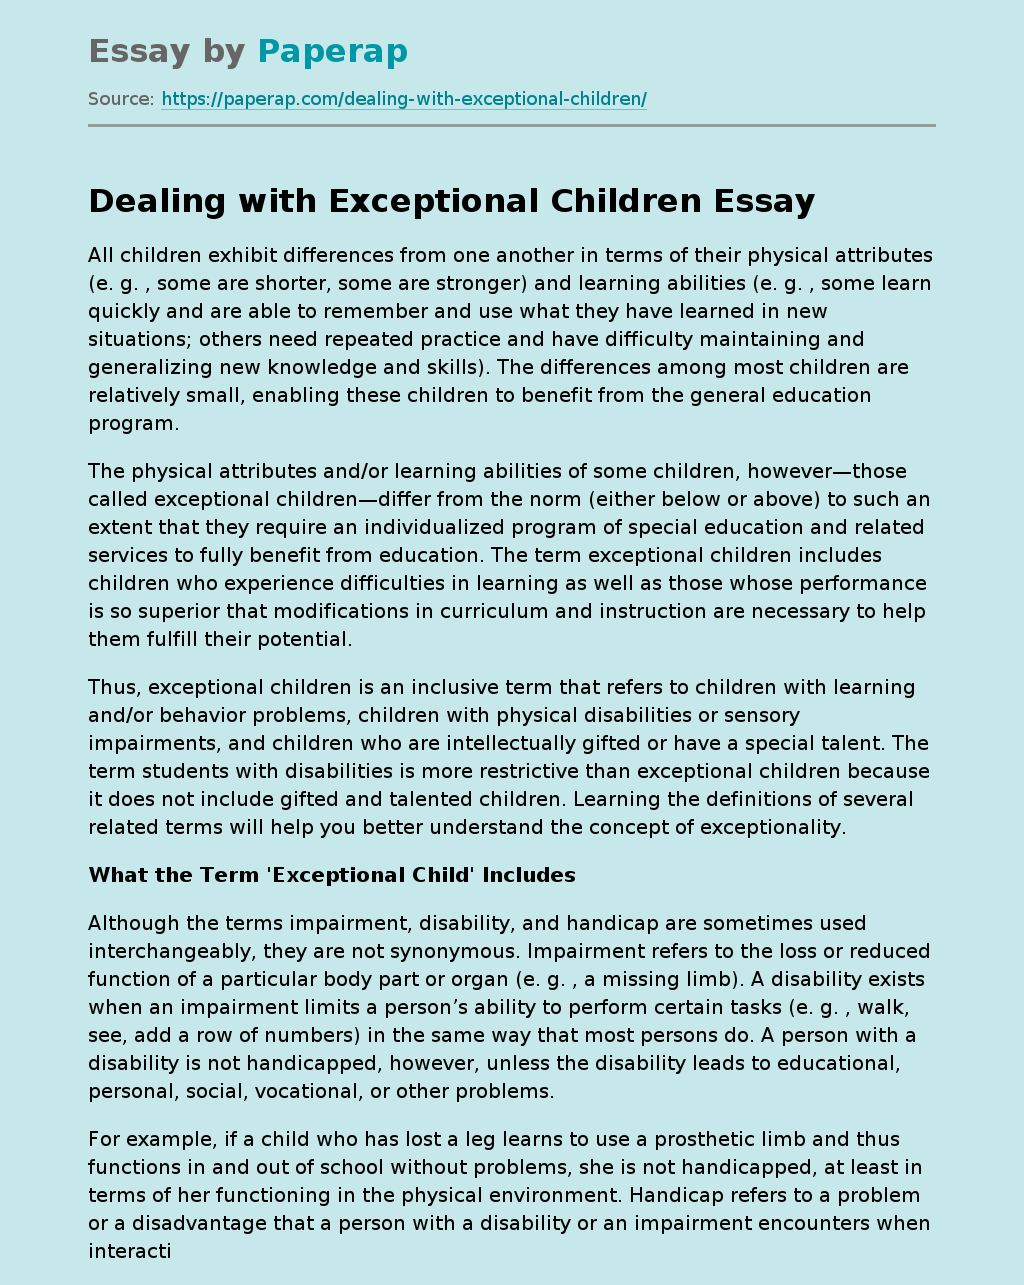 Dealing with Exceptional Children